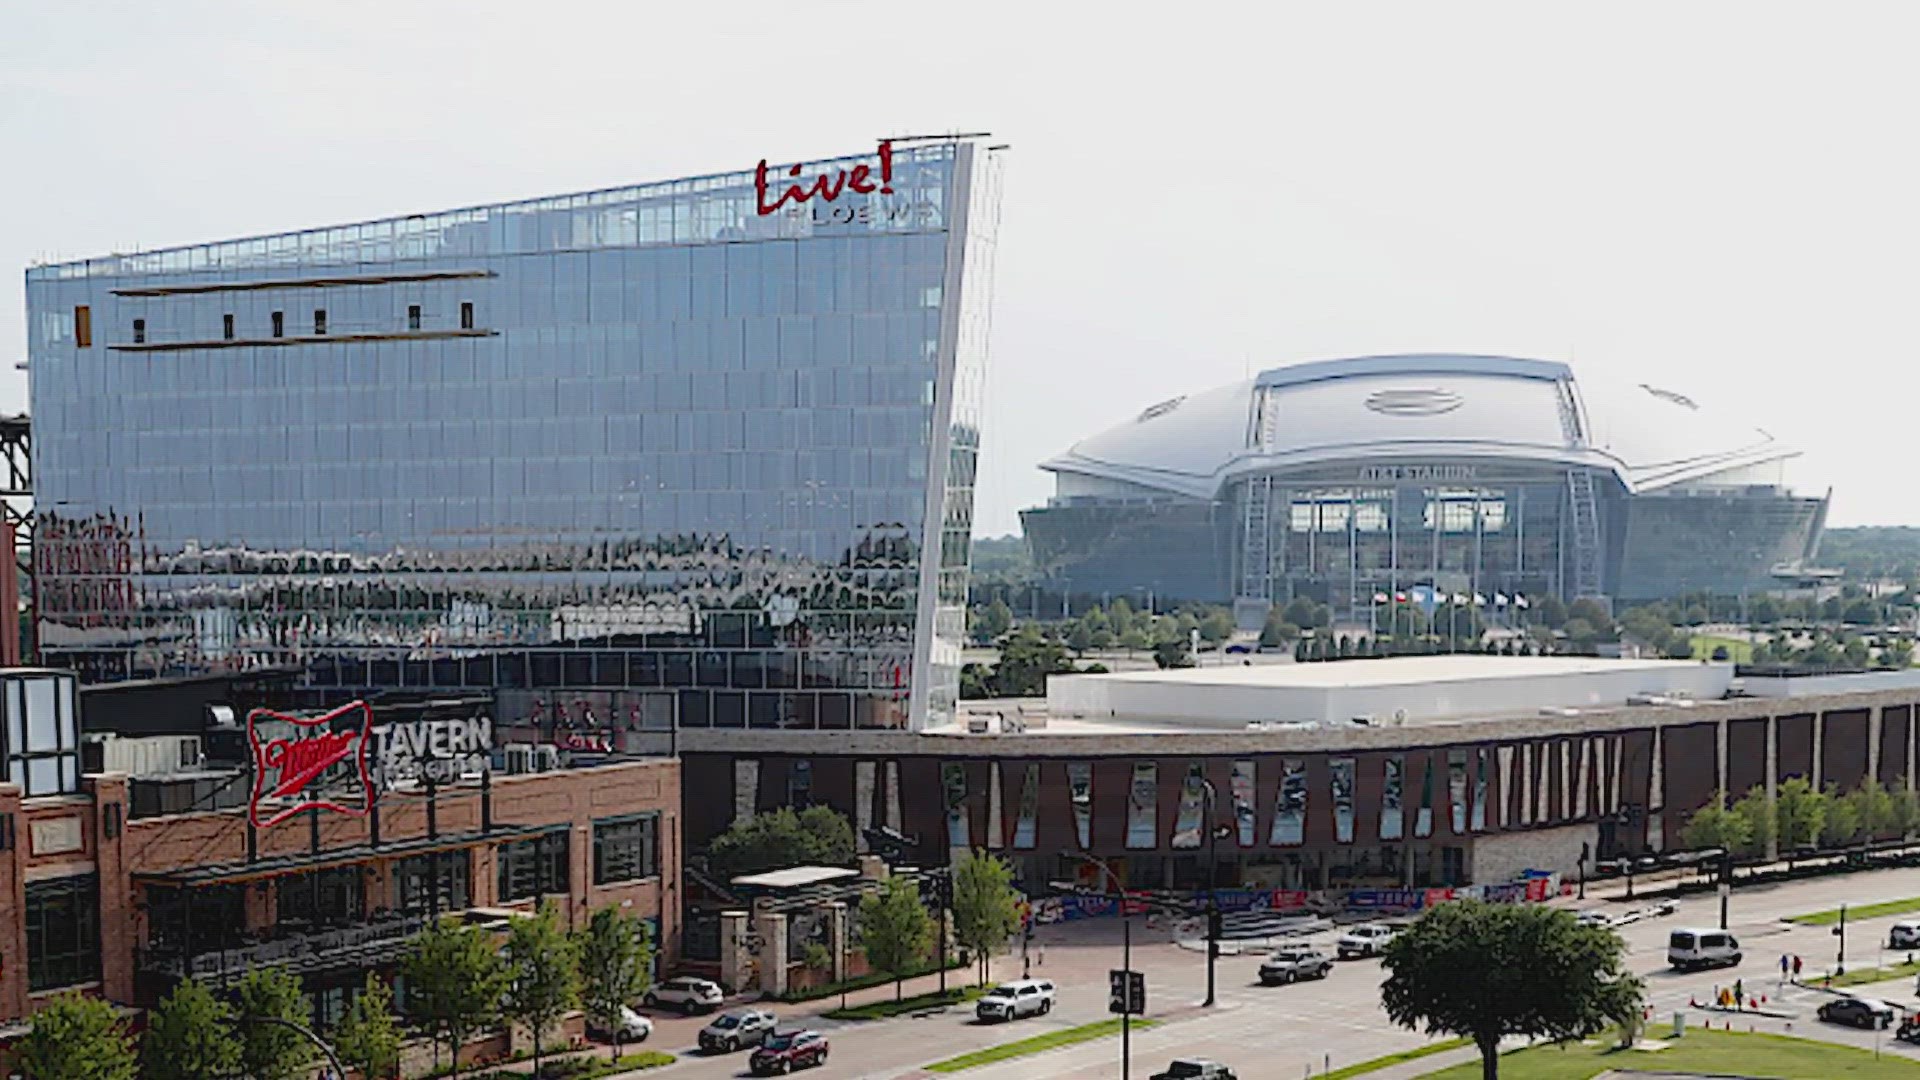 The Loews hotel is nearly attached to the stadium as part of the Texas Live! development on the north side of the ballpark.